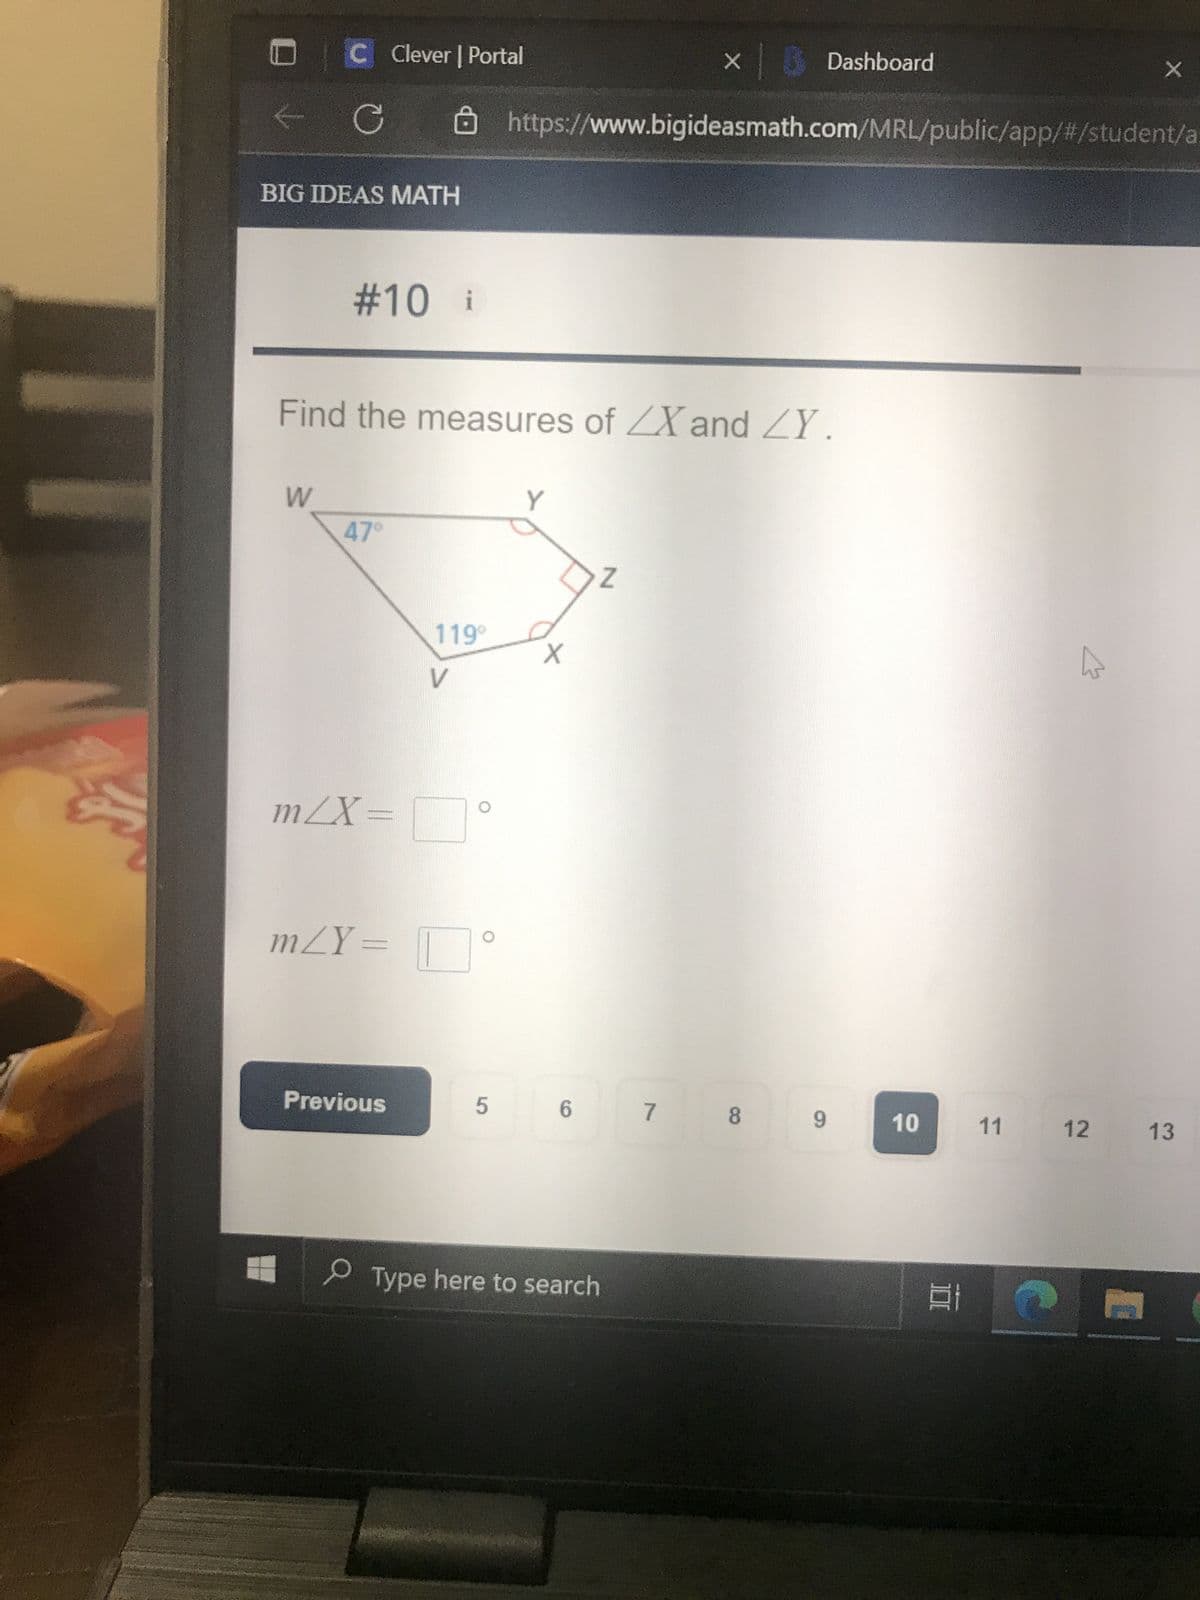 C Clever | Portal
C
BIG IDEAS MATH
W
#10 i
Find the measures of ZX and ZY.
47°
m/X=
119⁰
Previous
V
m/Y= °
5
https://www.bigideasmath.com/MRL/public/app/#/student/a
Y
X
6
Type here to search
× Dashboard
Z
7
8
9
10
100
11
X
C
12 13